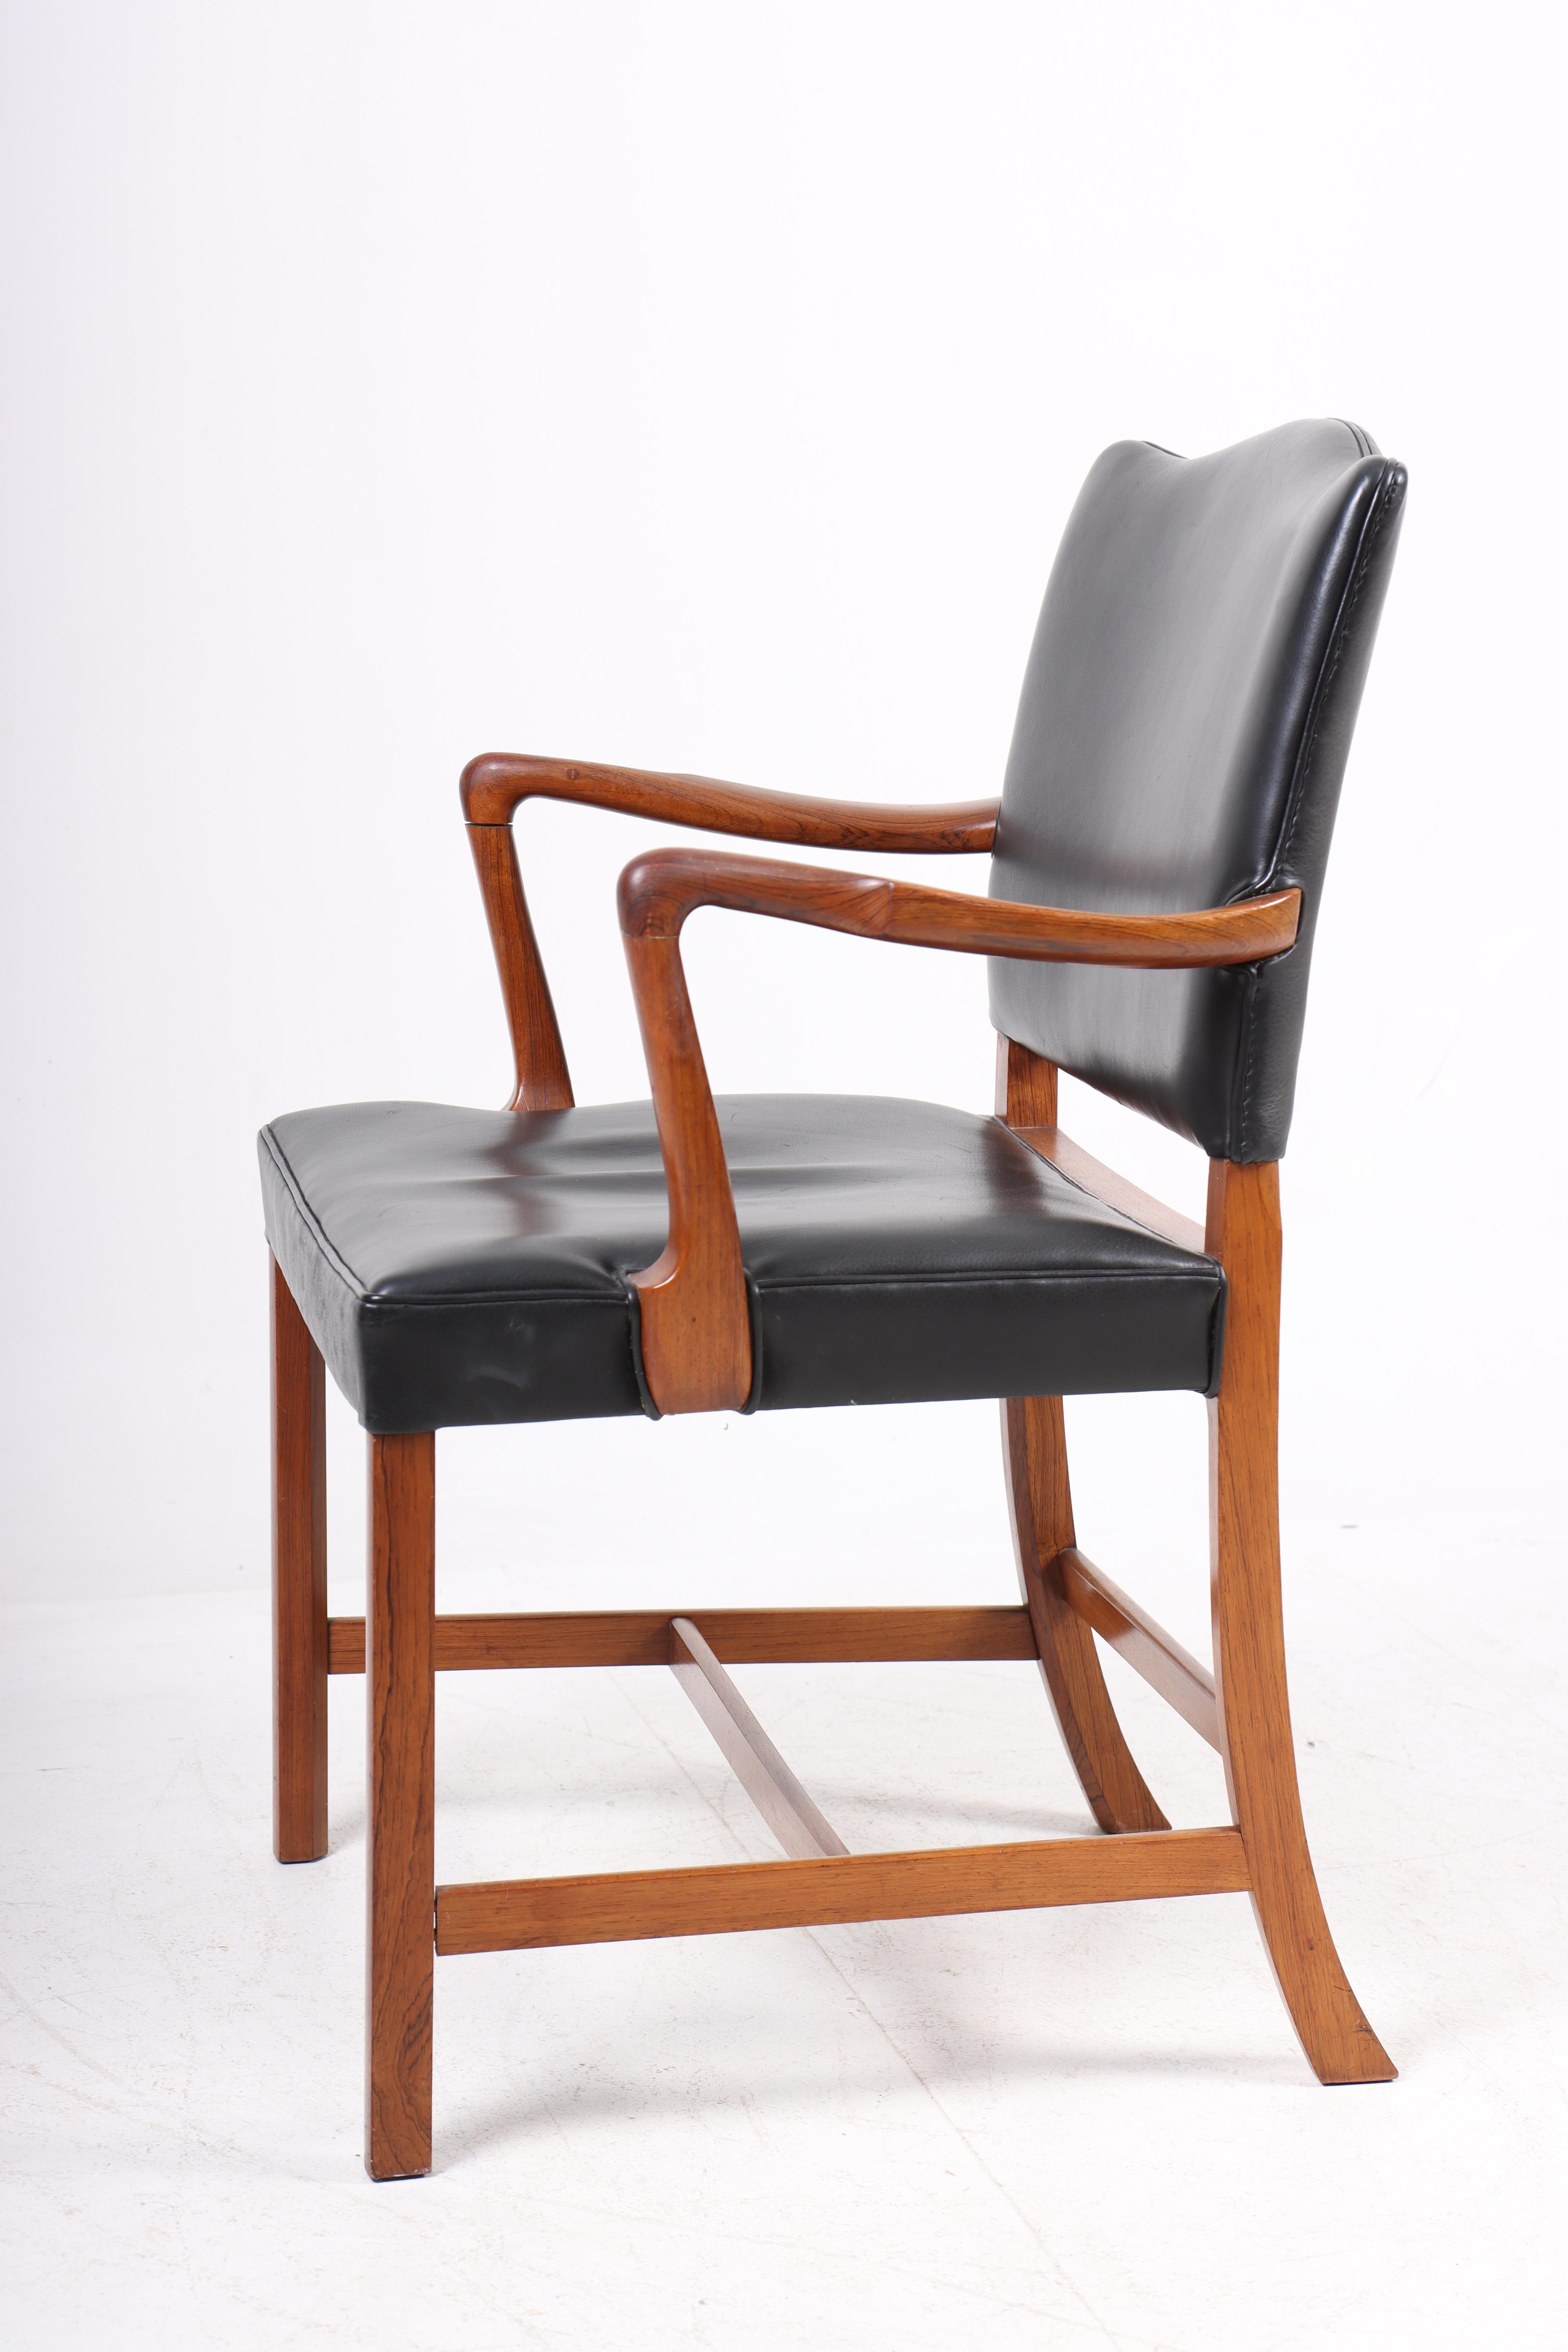 Mid-Century Armchair in Rosewood Designed by Ole Wanscher, Danish Design, 1950s For Sale 3